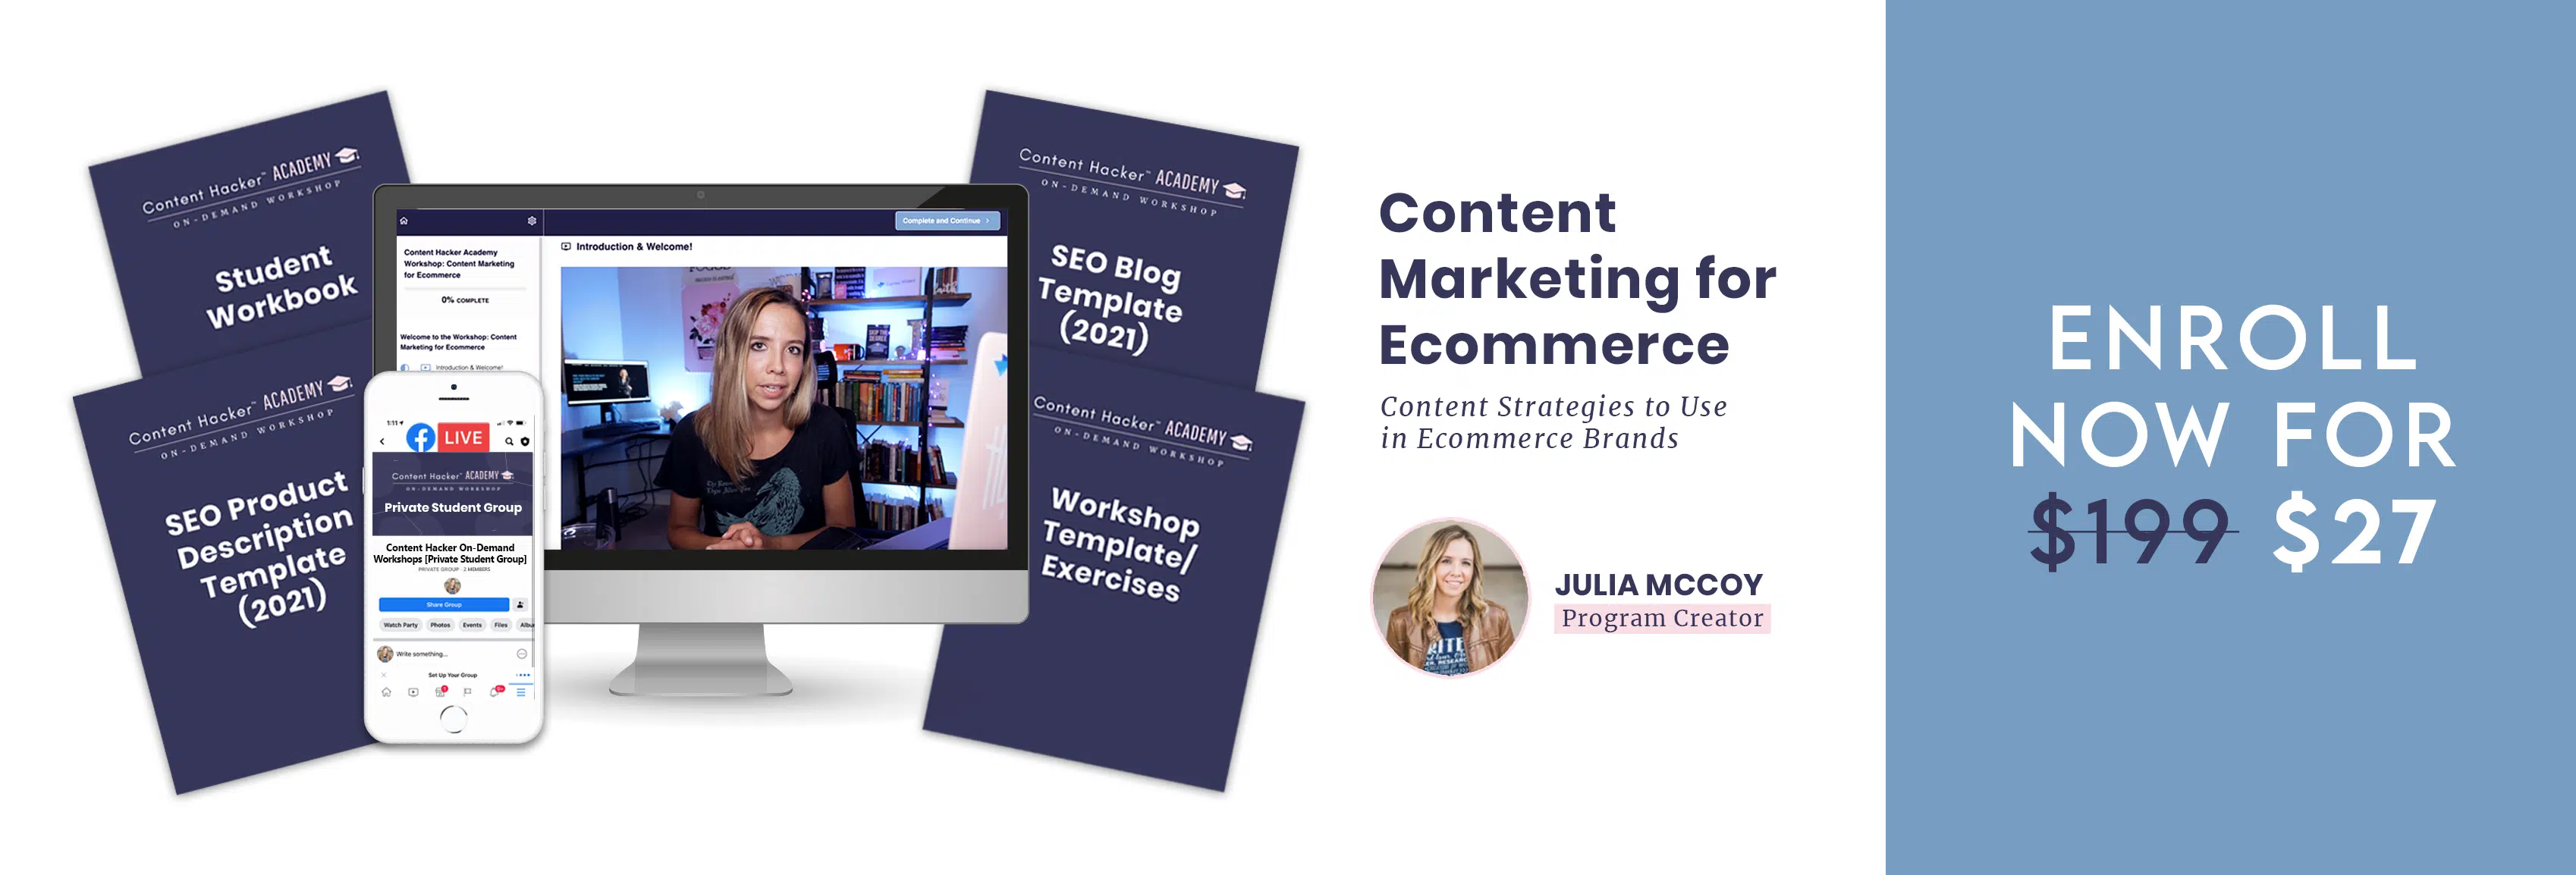 content marketing for ecommerce